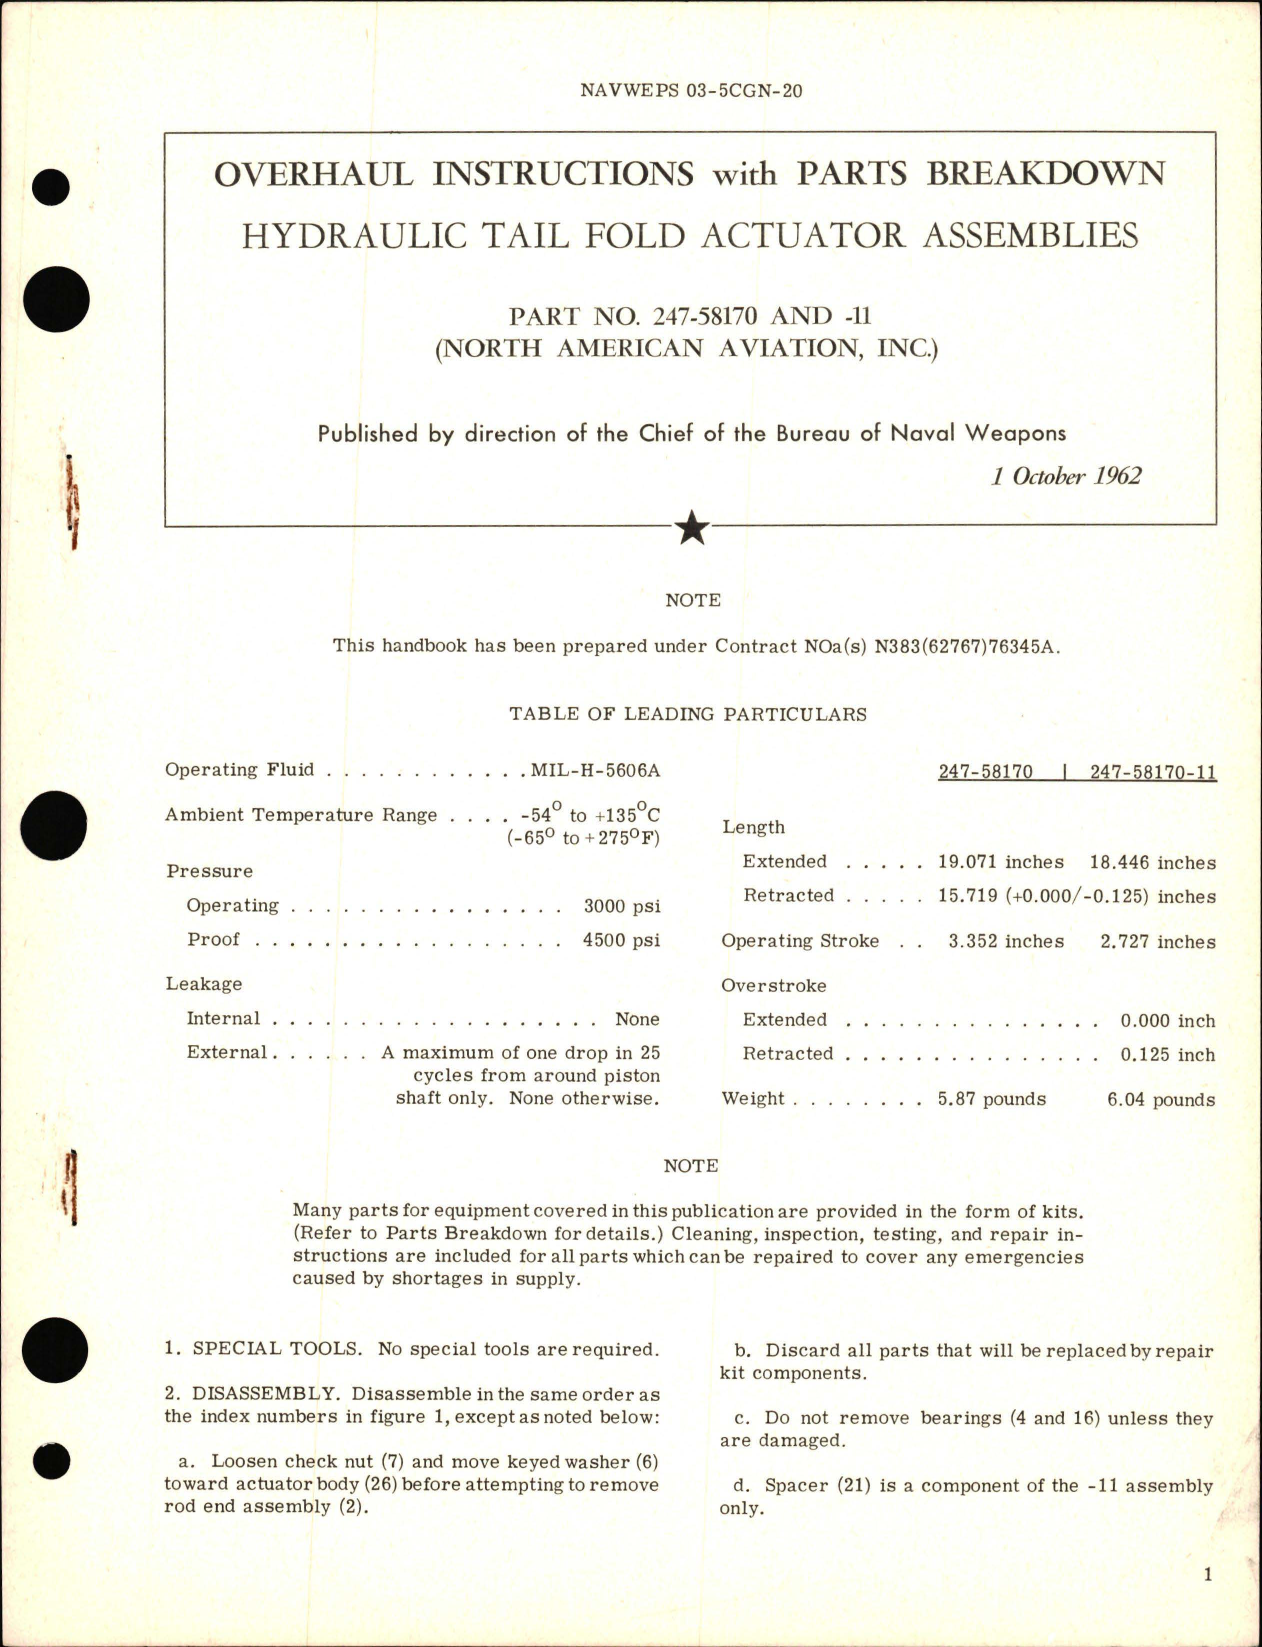 Sample page 1 from AirCorps Library document: Overhaul Instructions with Parts Breakdown for Hydraulic Tail Fold Actuator Assemblies - Part 247-58170 and 247-58170-11 